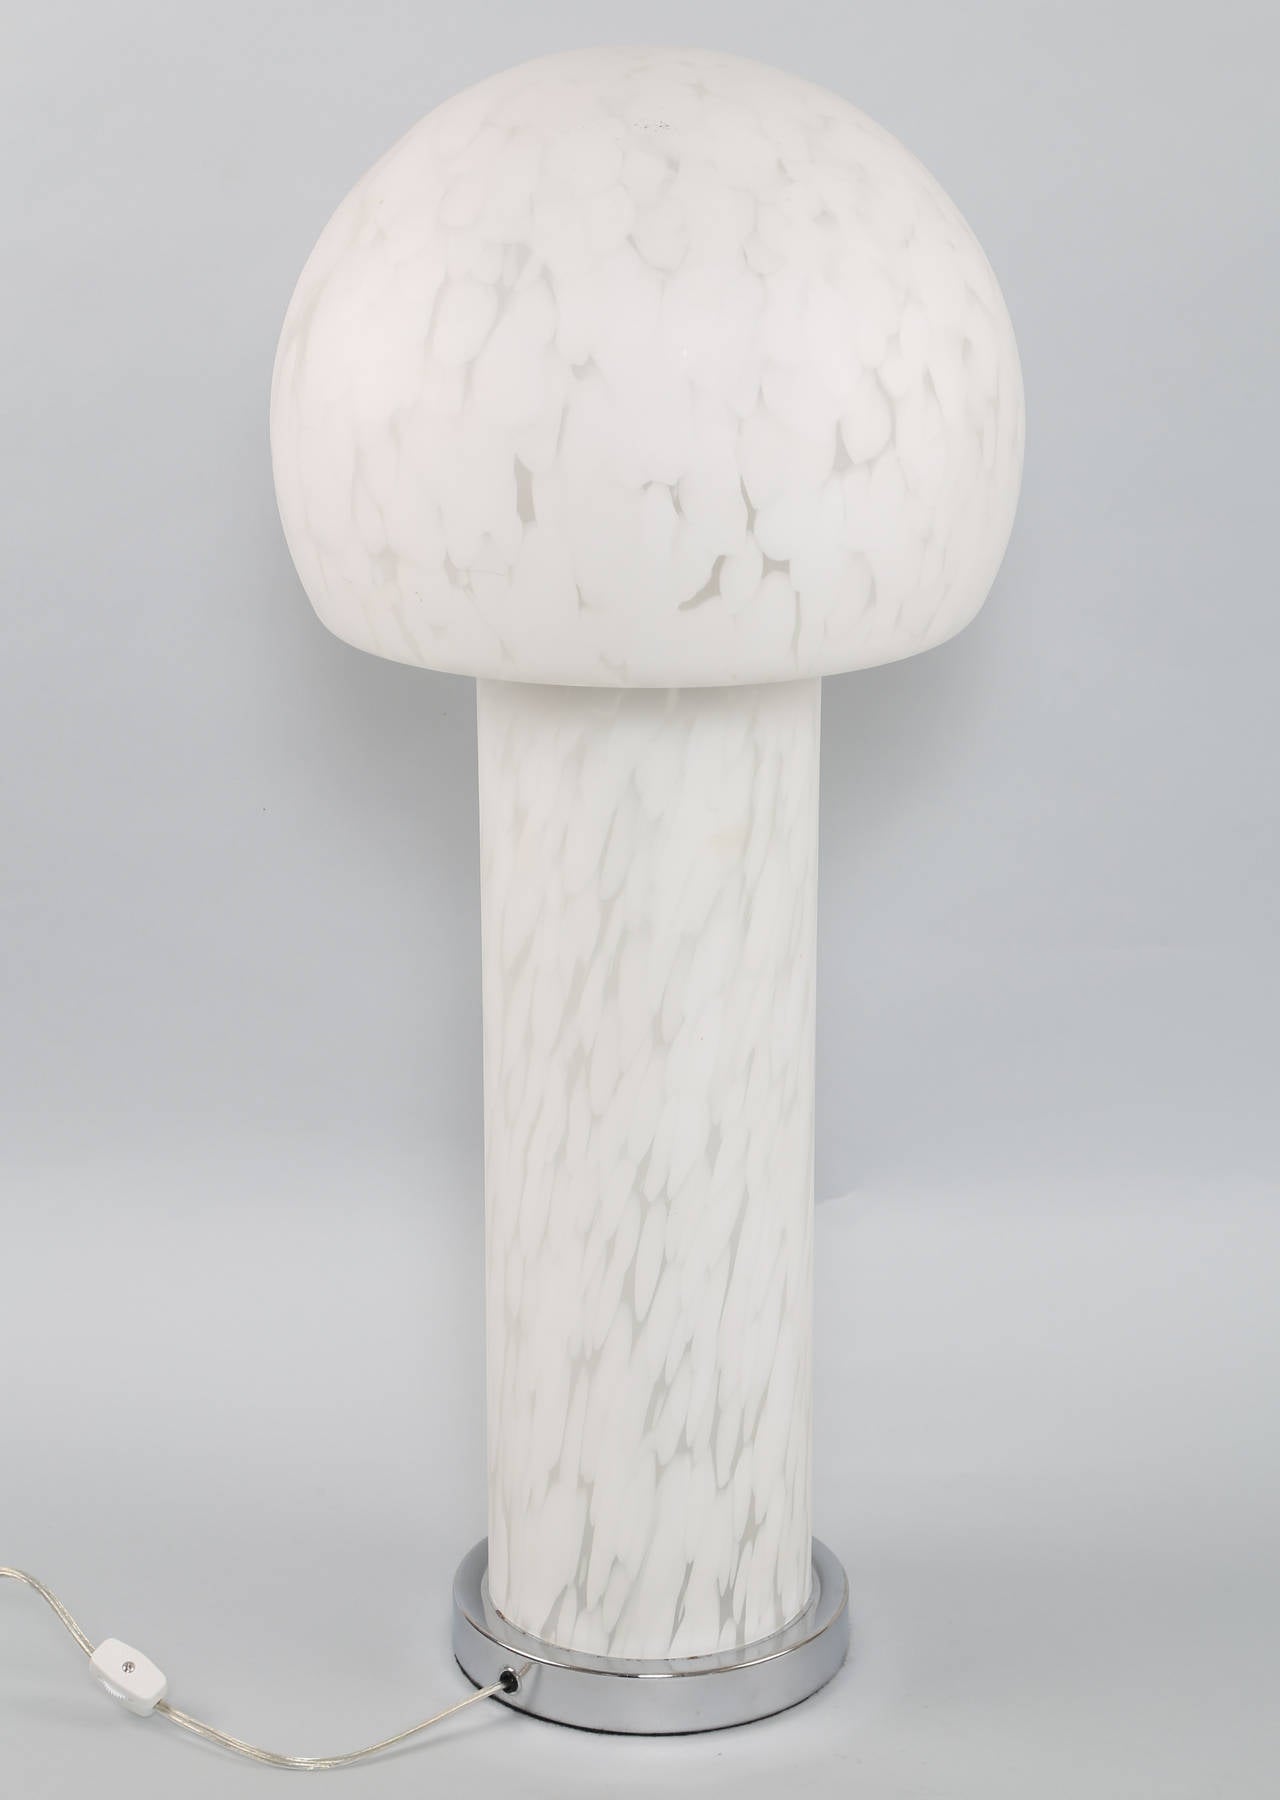 Tall and striking Murano table lamp with clear and white handblown mottled-glass, circa 1970s. Globe shade over internally lit columnar body on a round chrome base. Base is 7-1/2